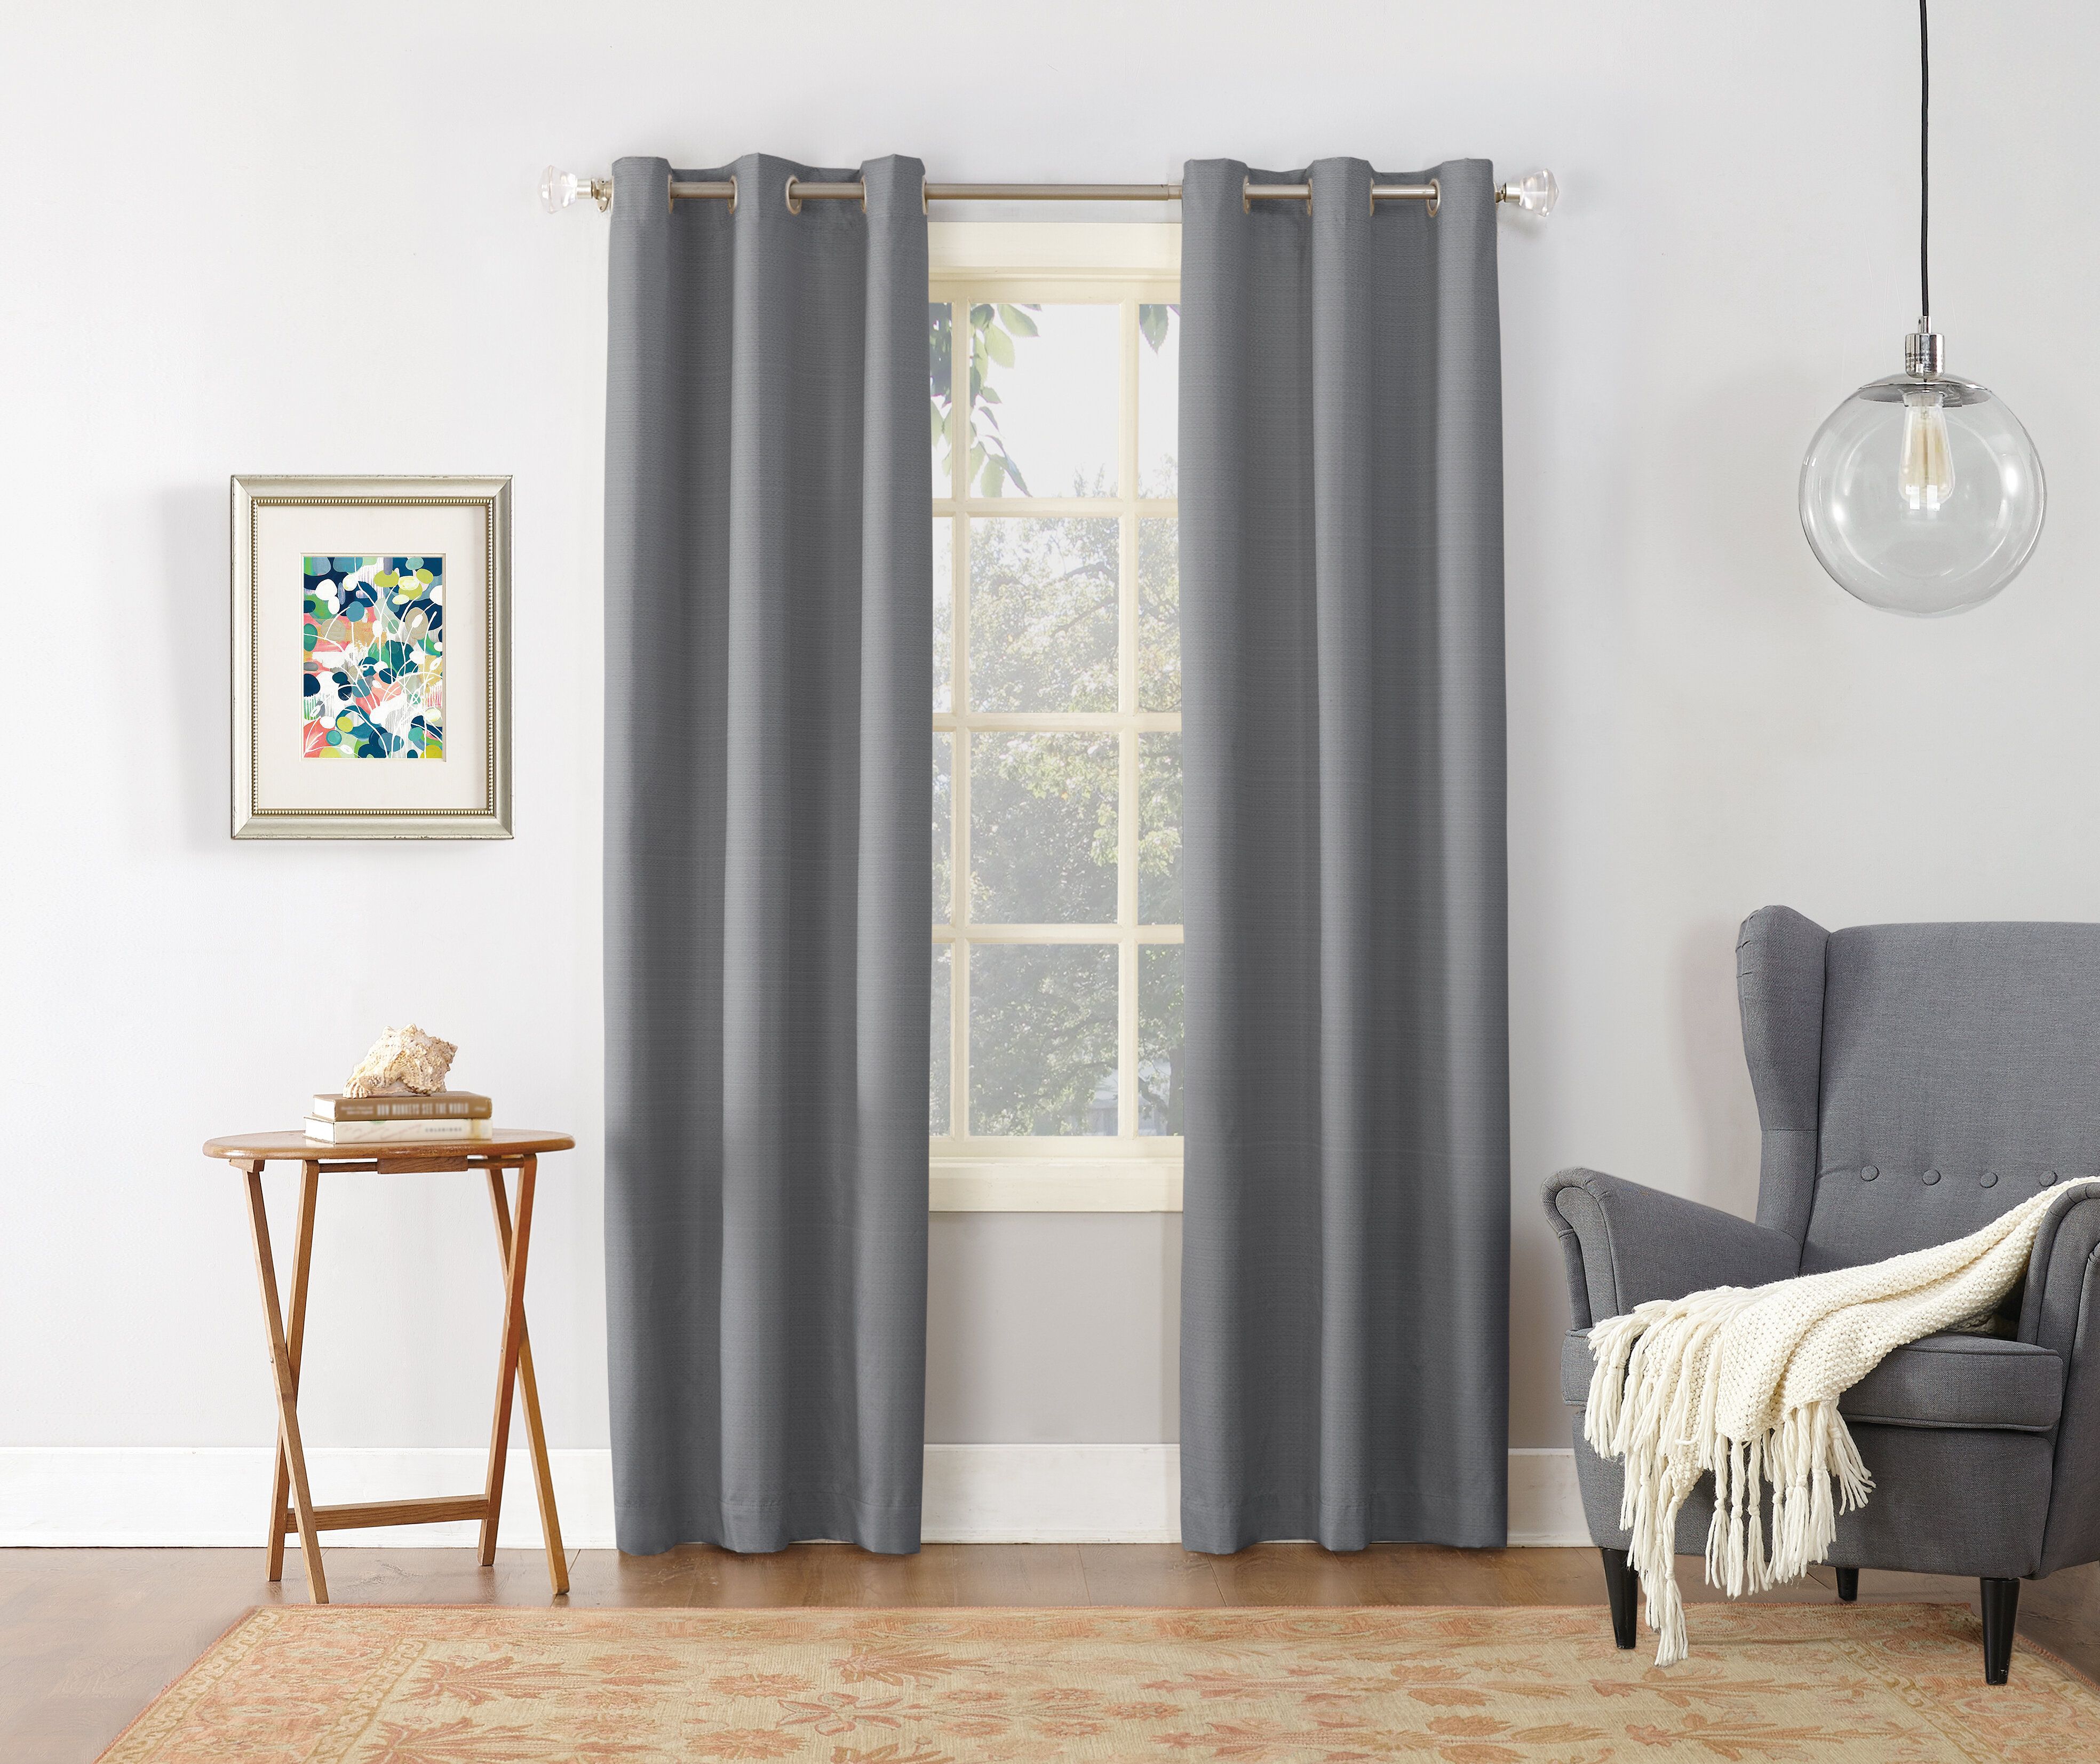 Cooper Textured Solid Room Darkening Thermal Grommet Single Curtain Panel Throughout Cooper Textured Thermal Insulated Grommet Curtain Panels (View 10 of 20)